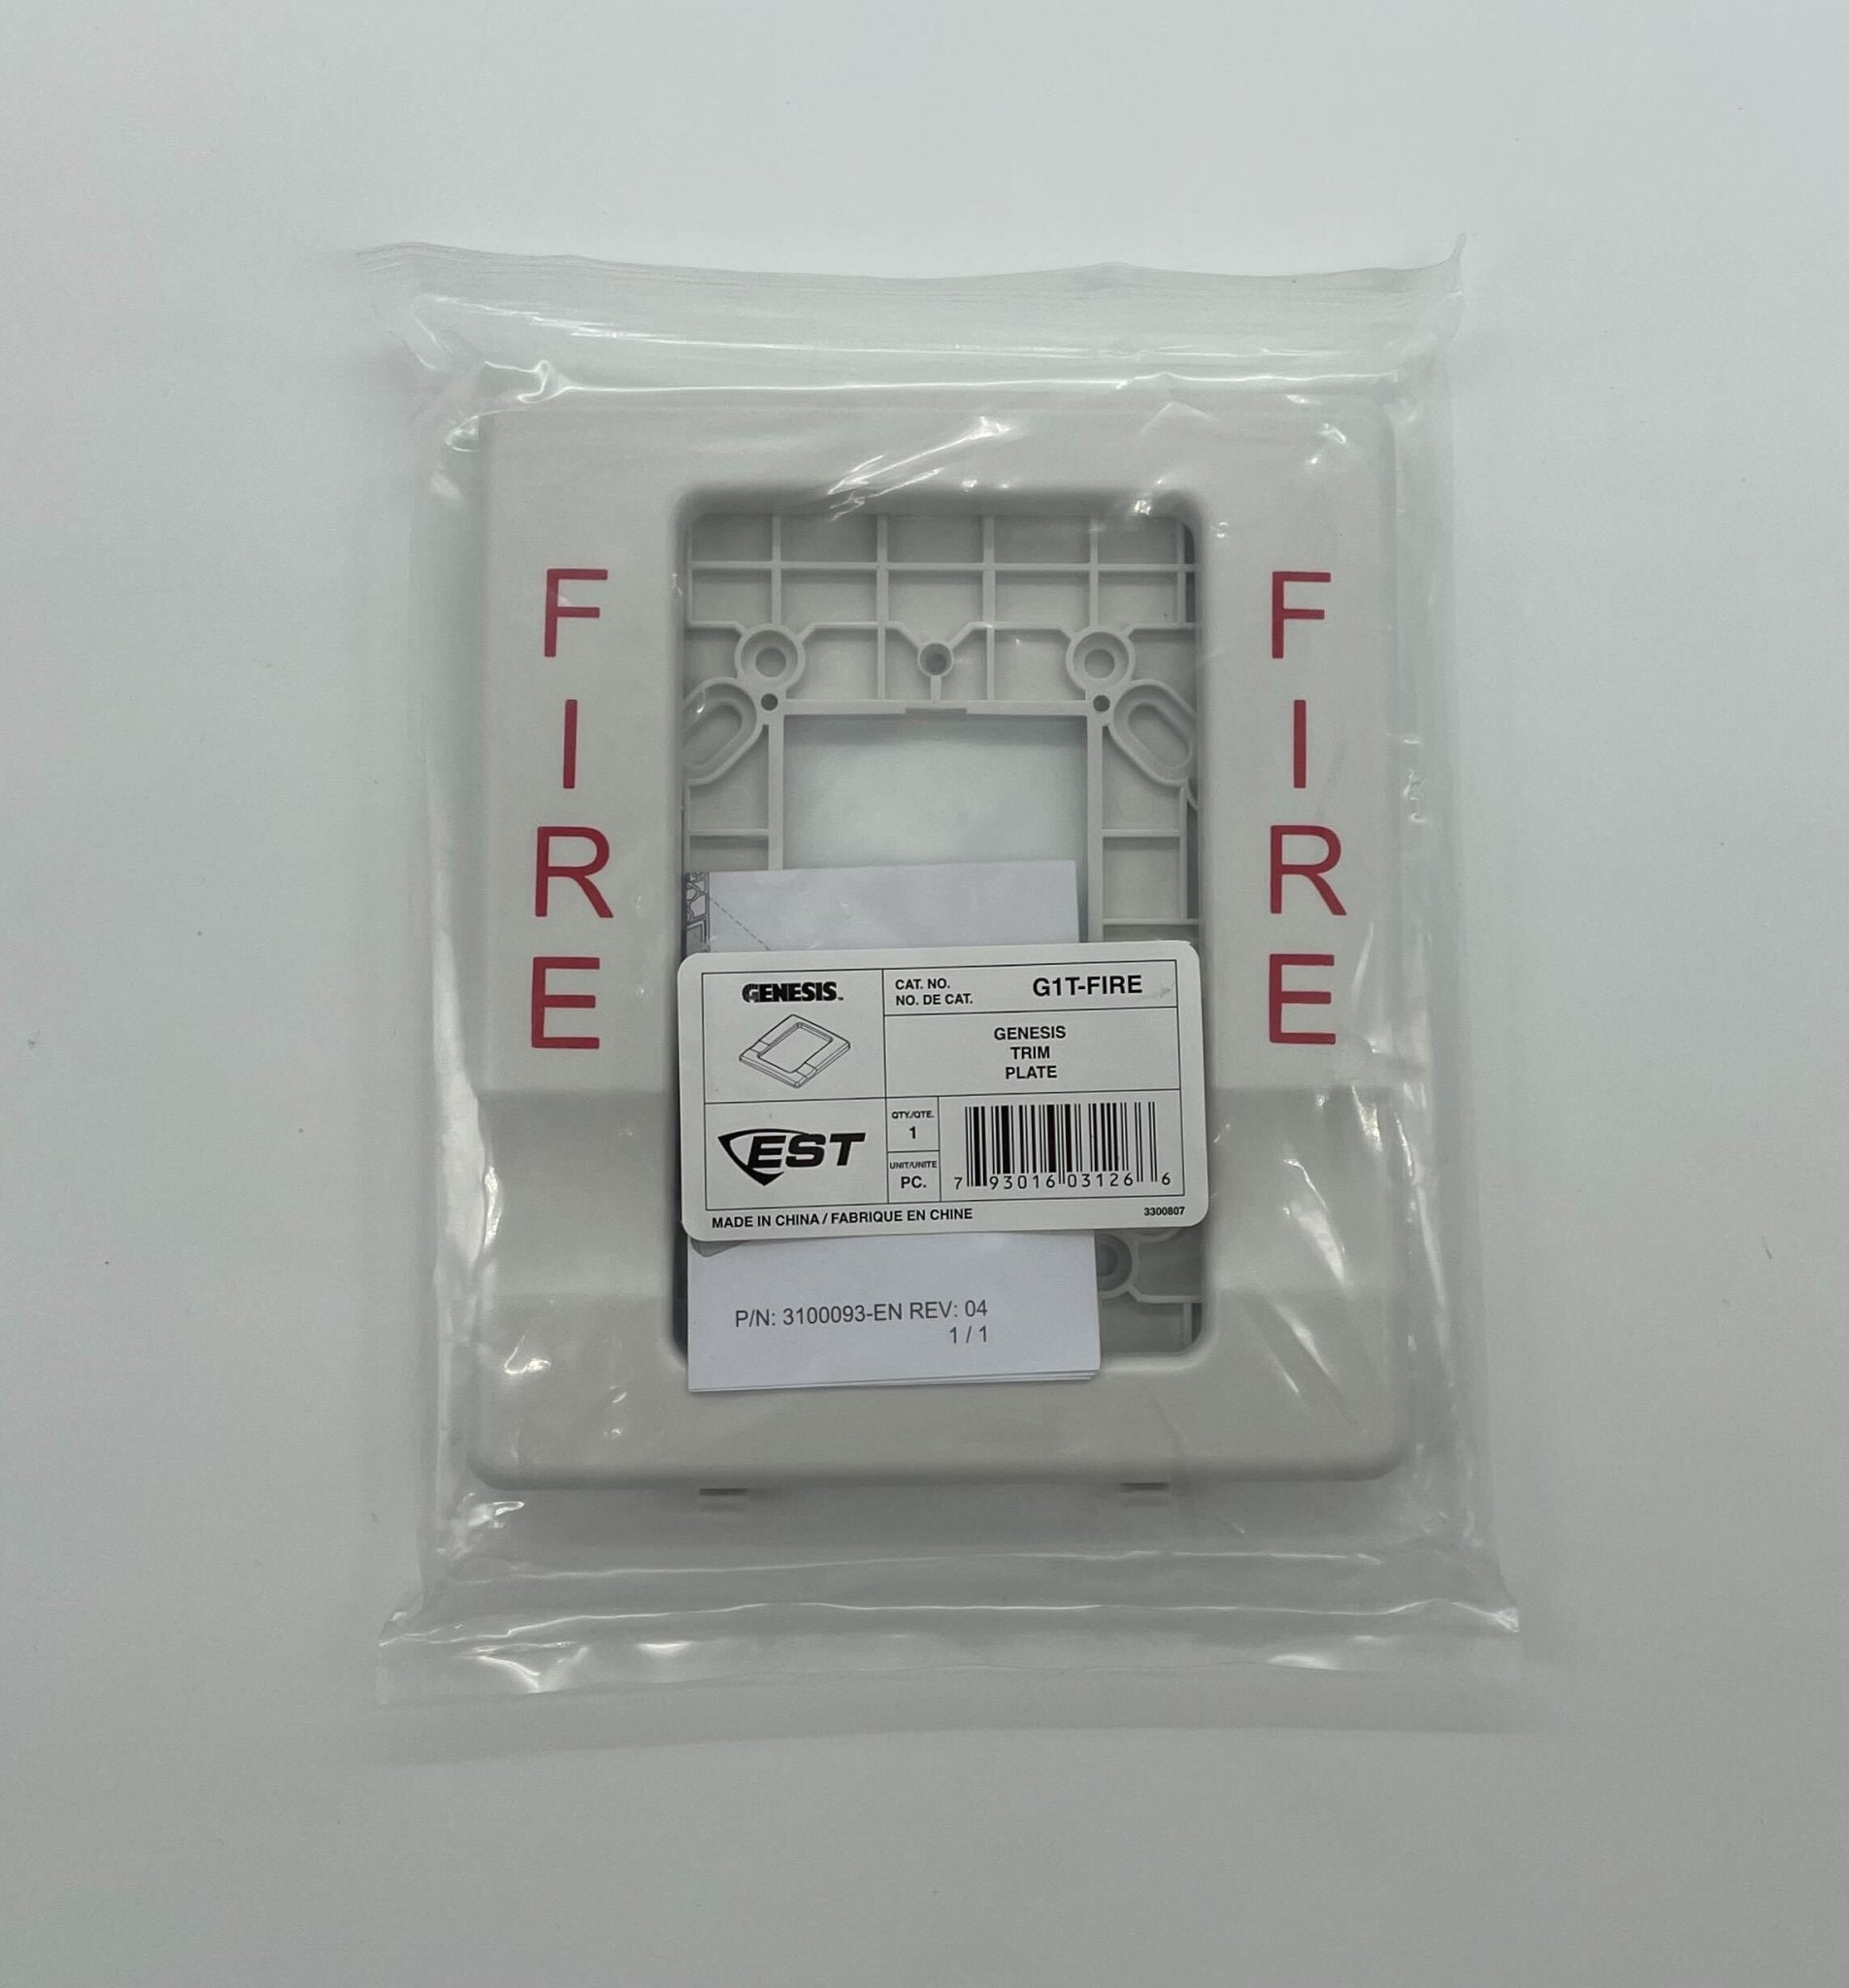 Edwards G1T-FIRE - The Fire Alarm Supplier